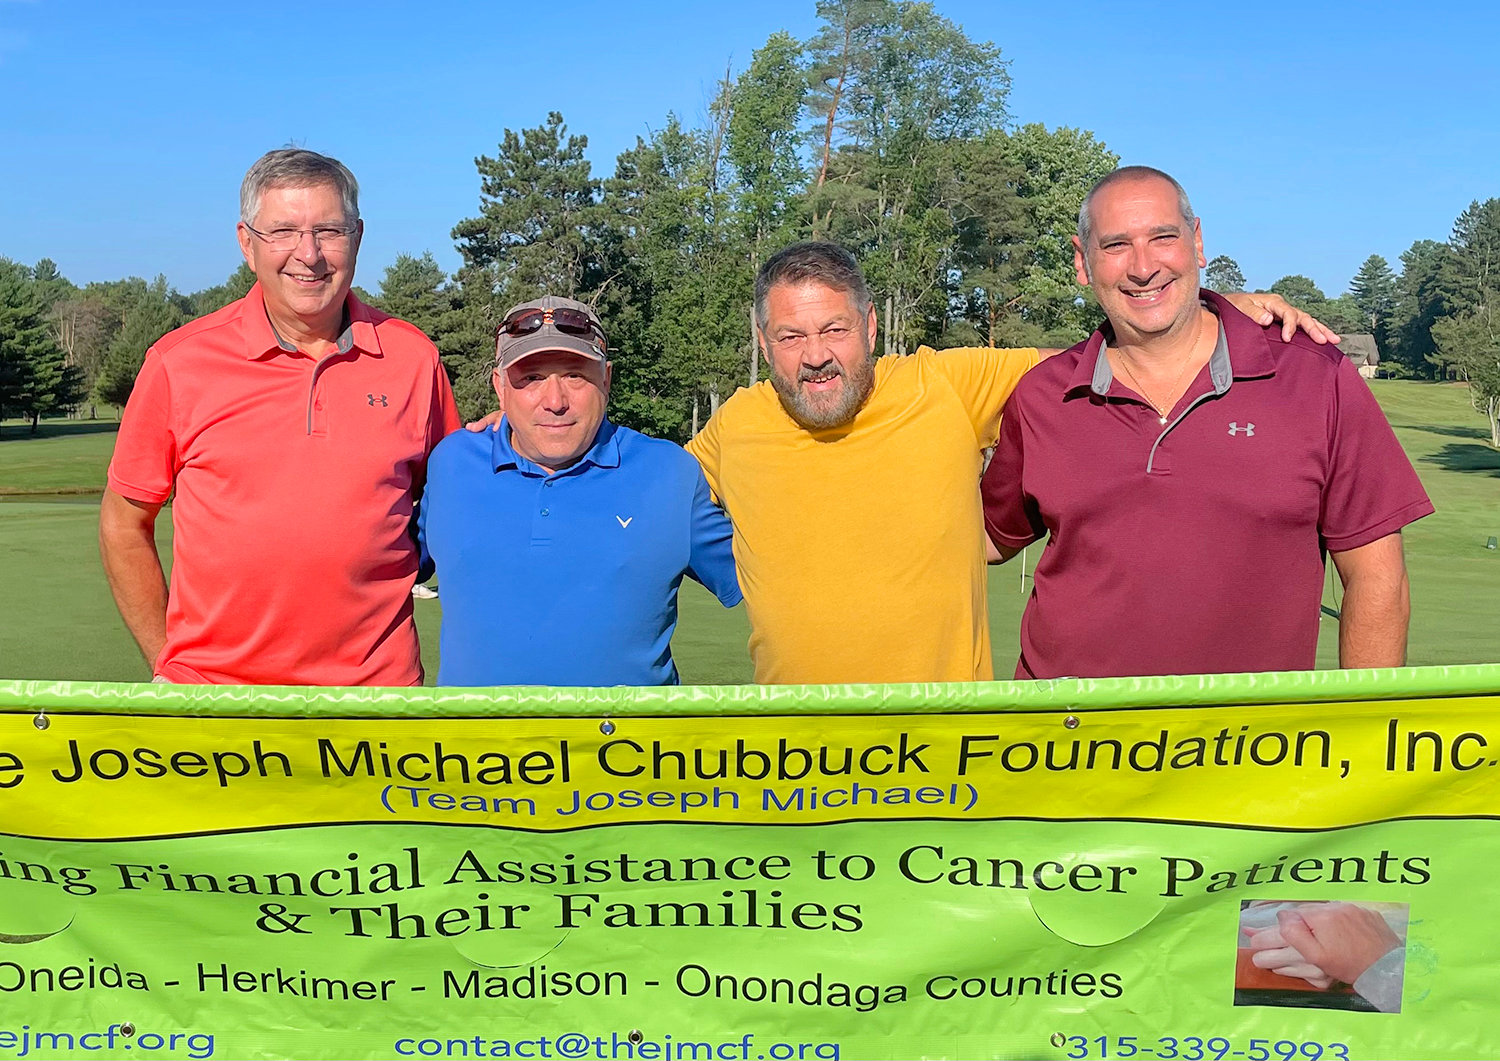 Three-time winners of the Joseph Michael Chubbuck Foundation, Inc. annual golf tournament held at Rome Country Club on Aug. 6 were the Bushwhackers — Dave Olney, Steve Fogelman, Bill Daskiewich and Aaron Bouton. (Photo submitted)